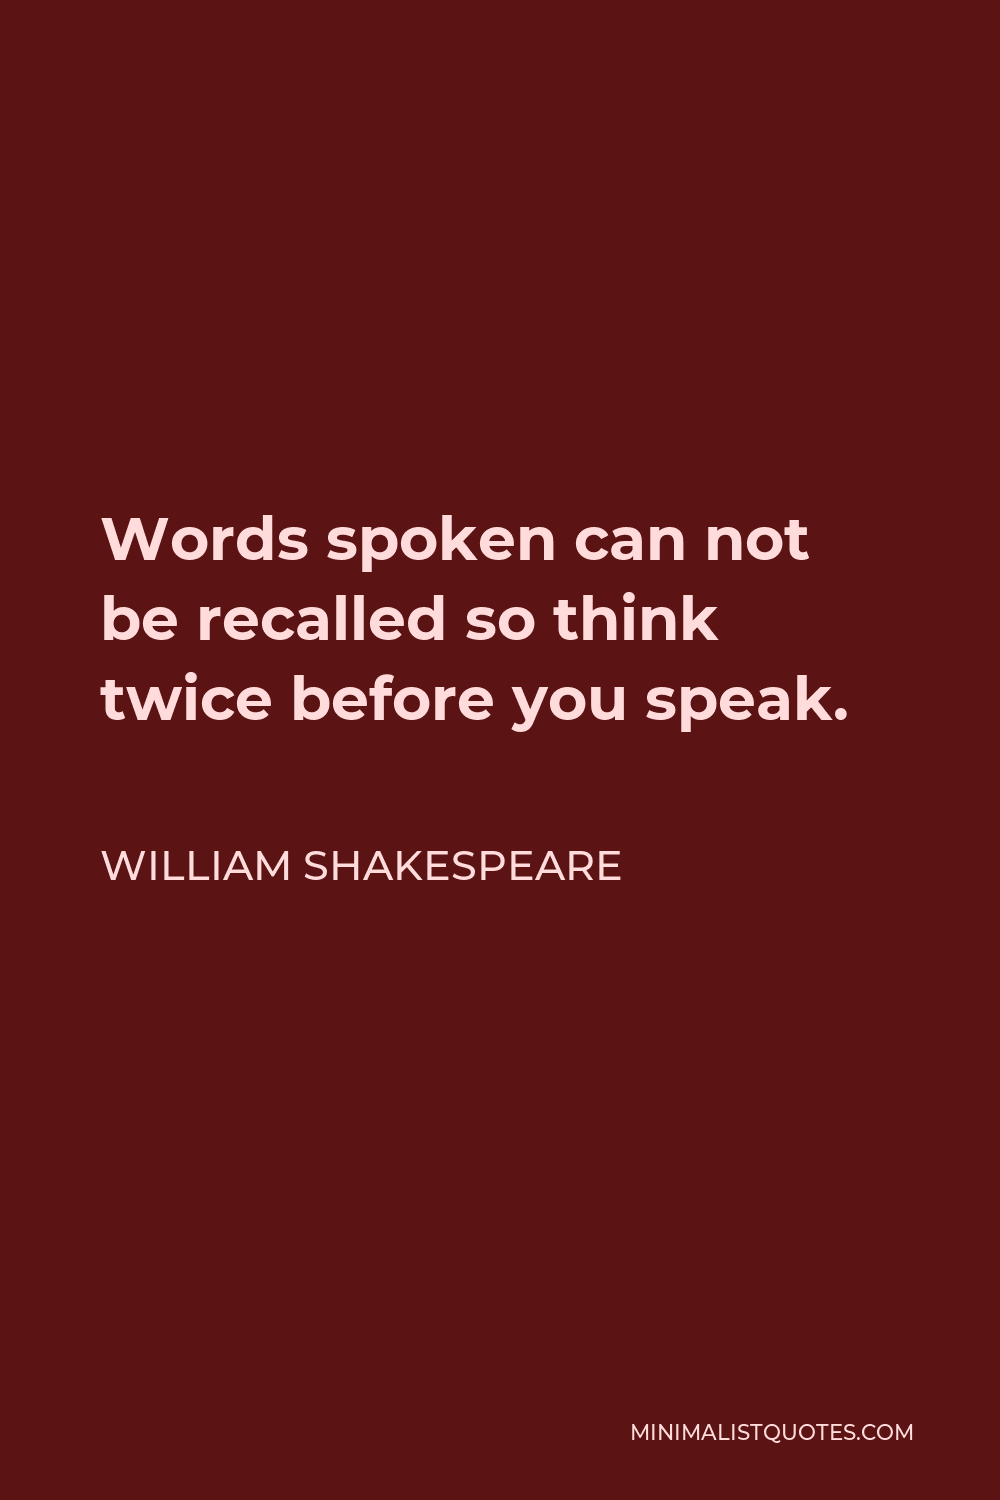 William Shakespeare Quote - Words spoken can not be recalled so think twice before you speak.